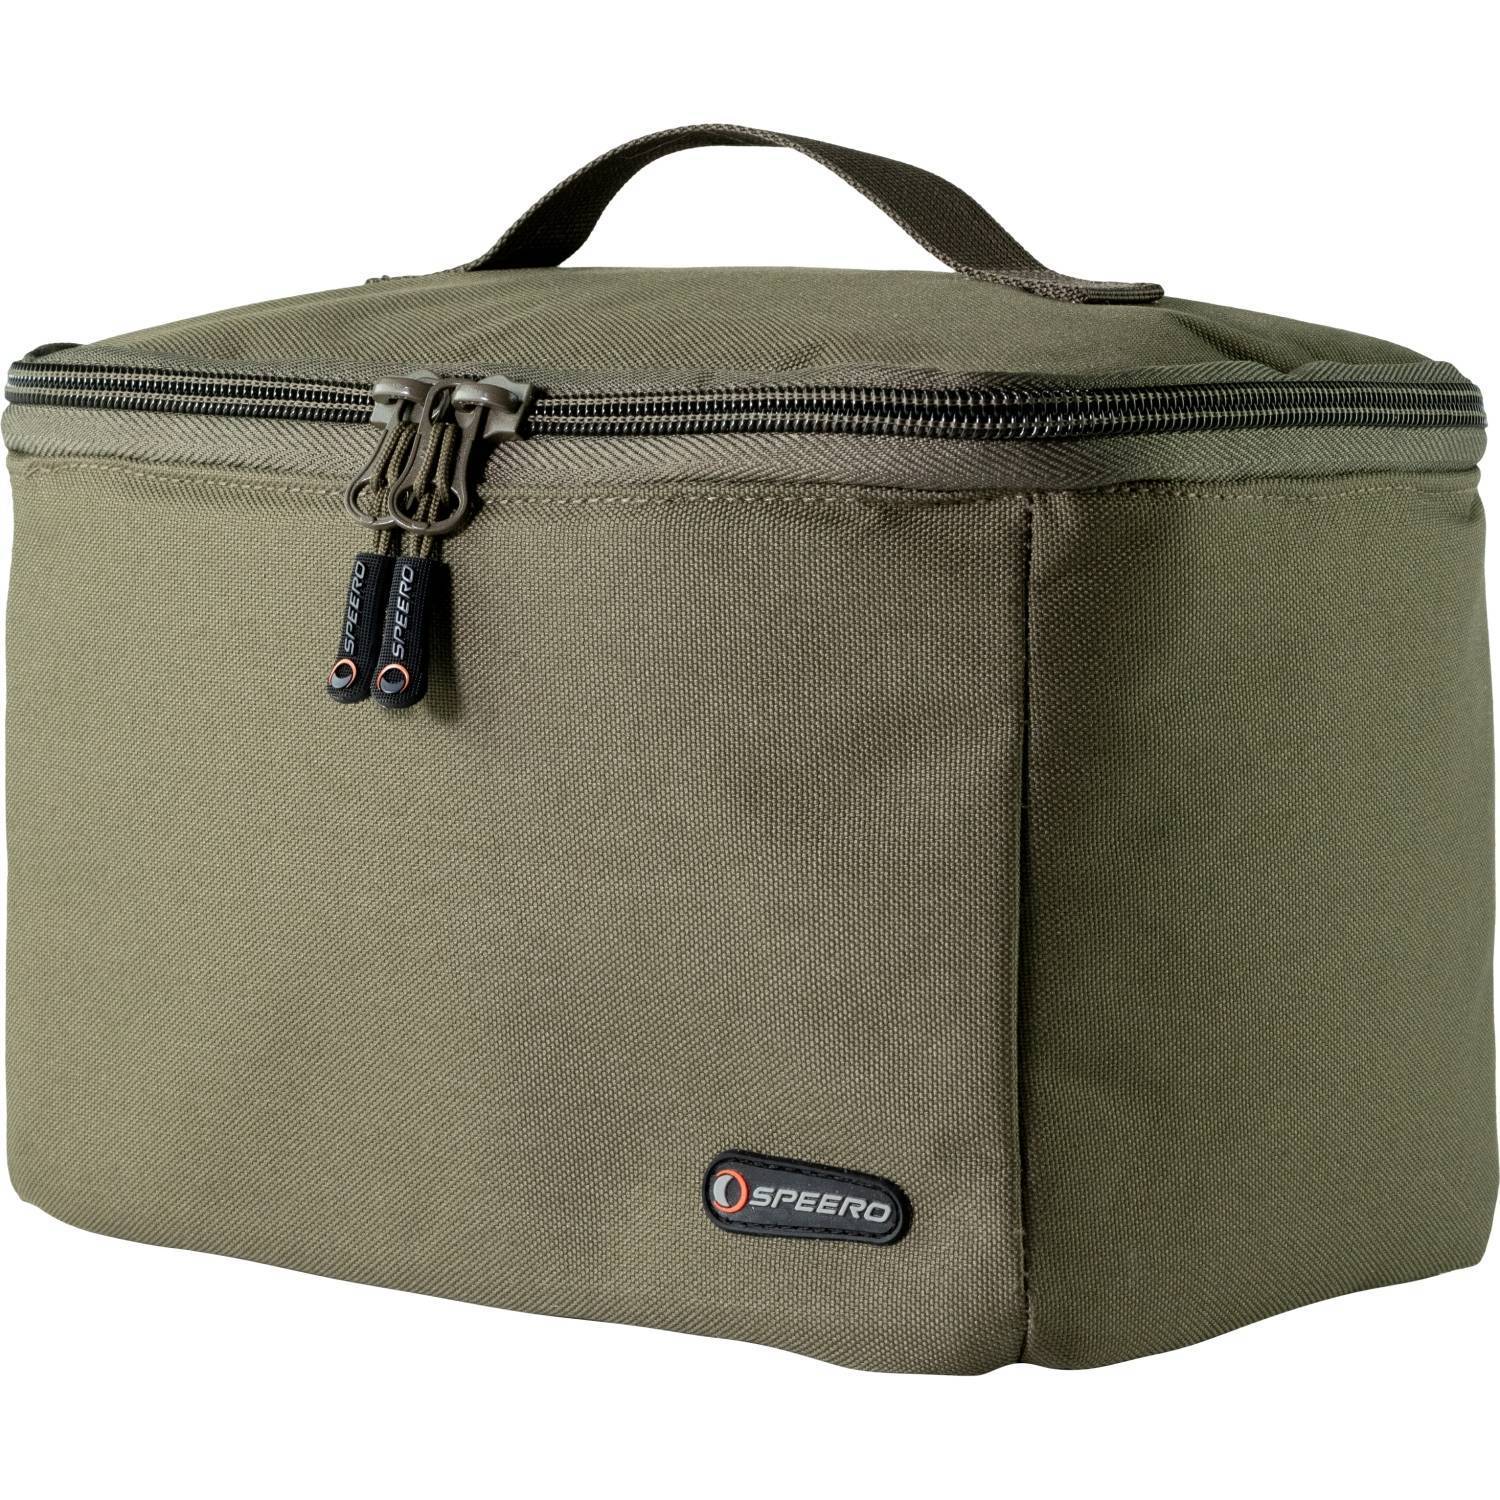 Speero Tackle Bait Cool Bag Review